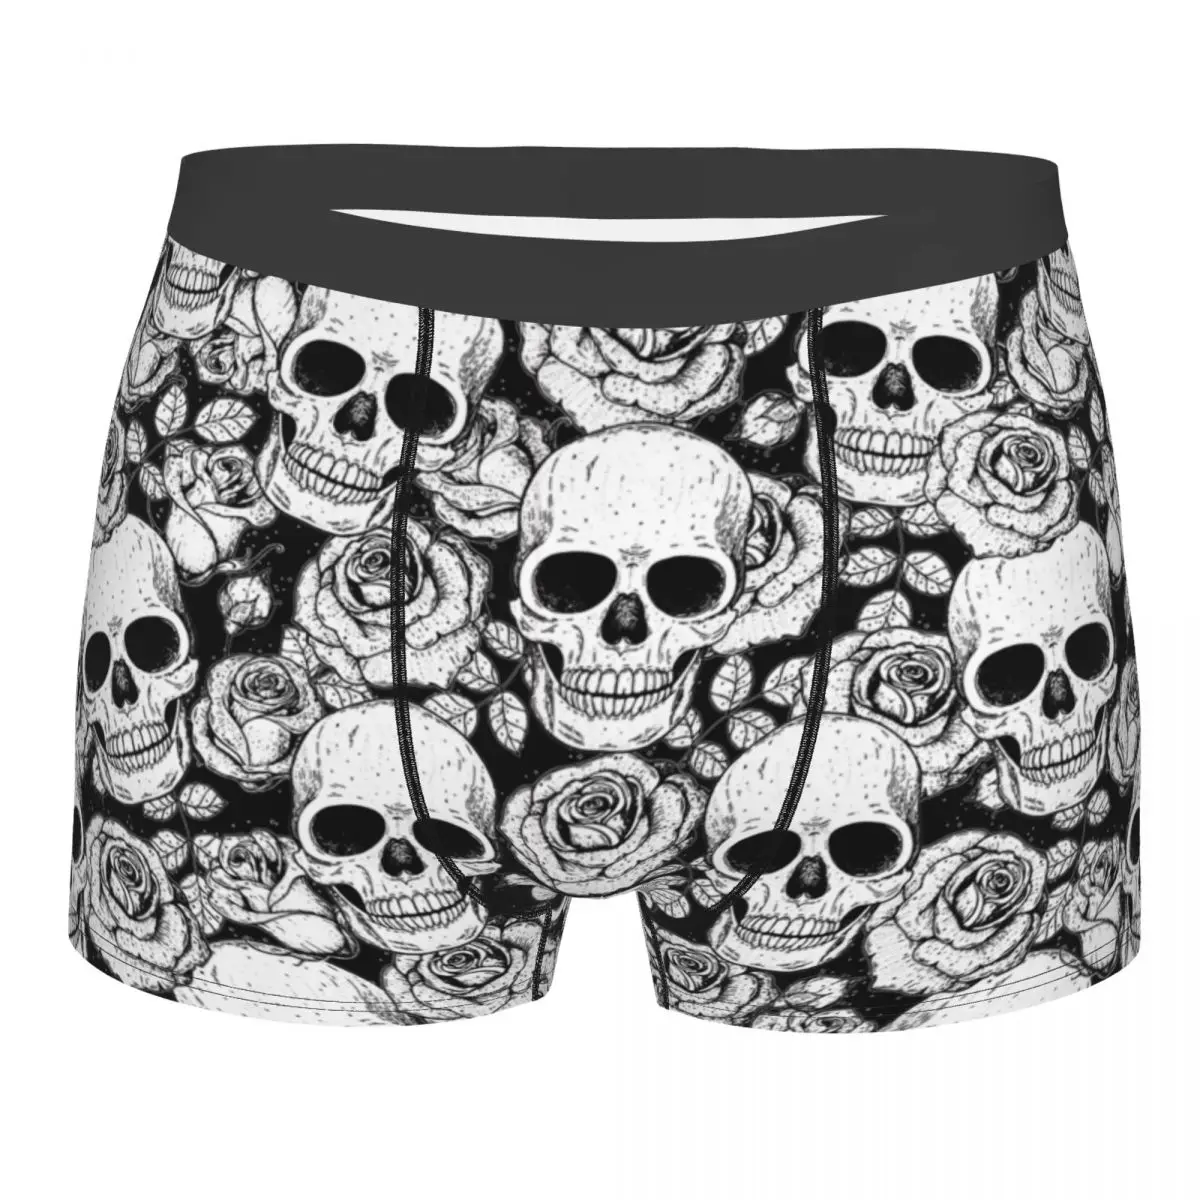 

Horror Skeleton Gothic Death Skull Underwear Male Sexy Print Customized Boxer Briefs Shorts Panties Soft Underpants